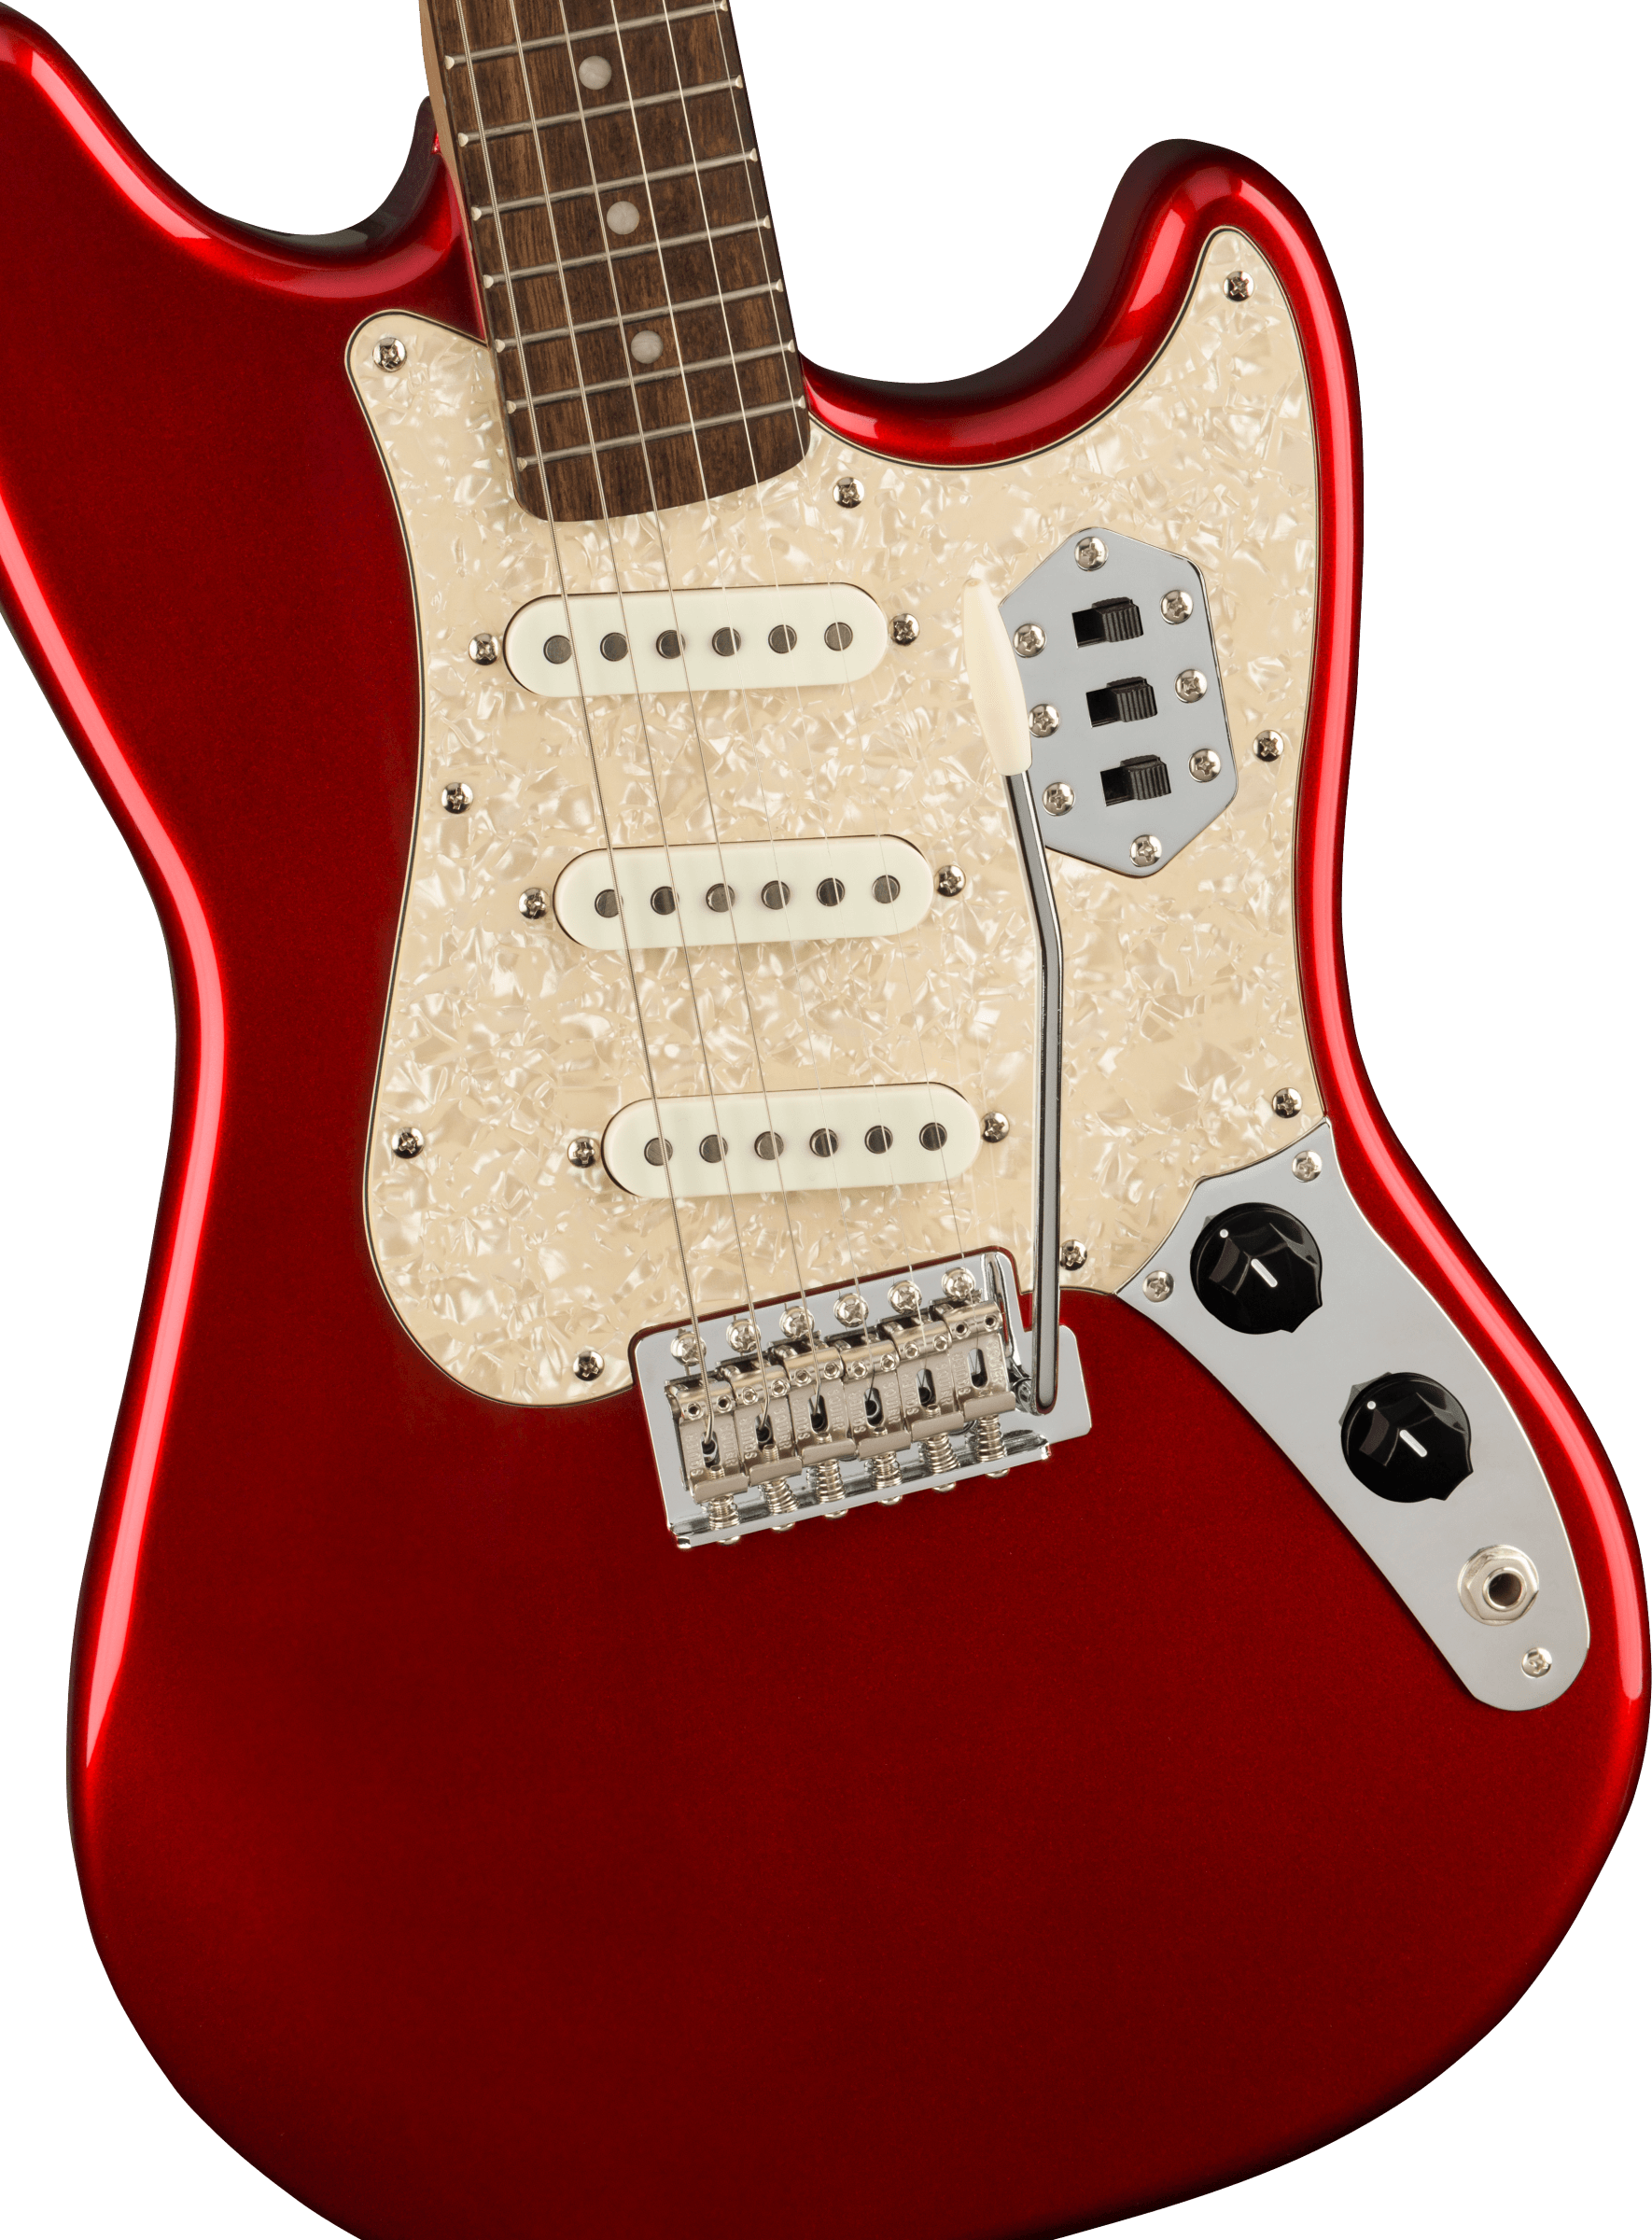 Squier Cyclone Paranormal 3s Trem Lau - Candy Apple Red - Retro-Rock-E-Gitarre - Variation 2